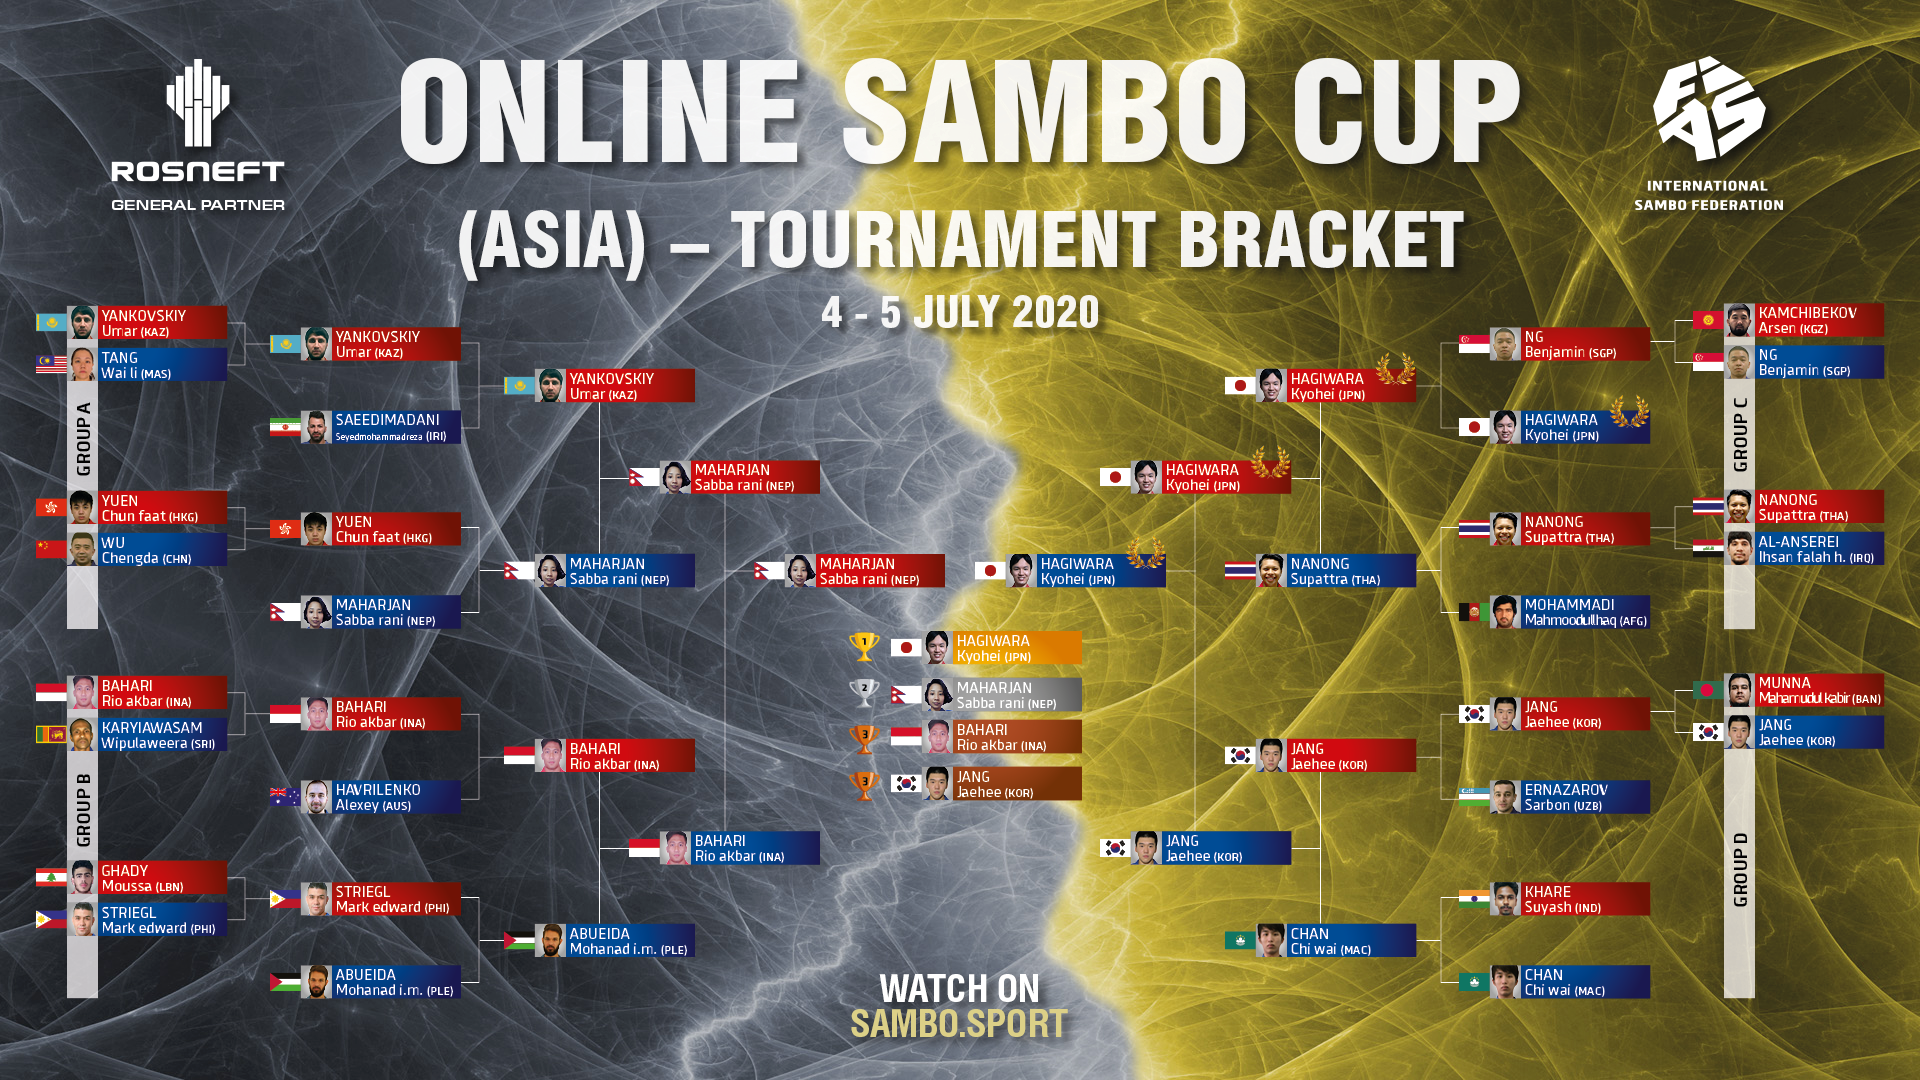 Online Sambo Cup (Asia) Results and Interviews of the Finalists International SAMBO Federation (FIAS)